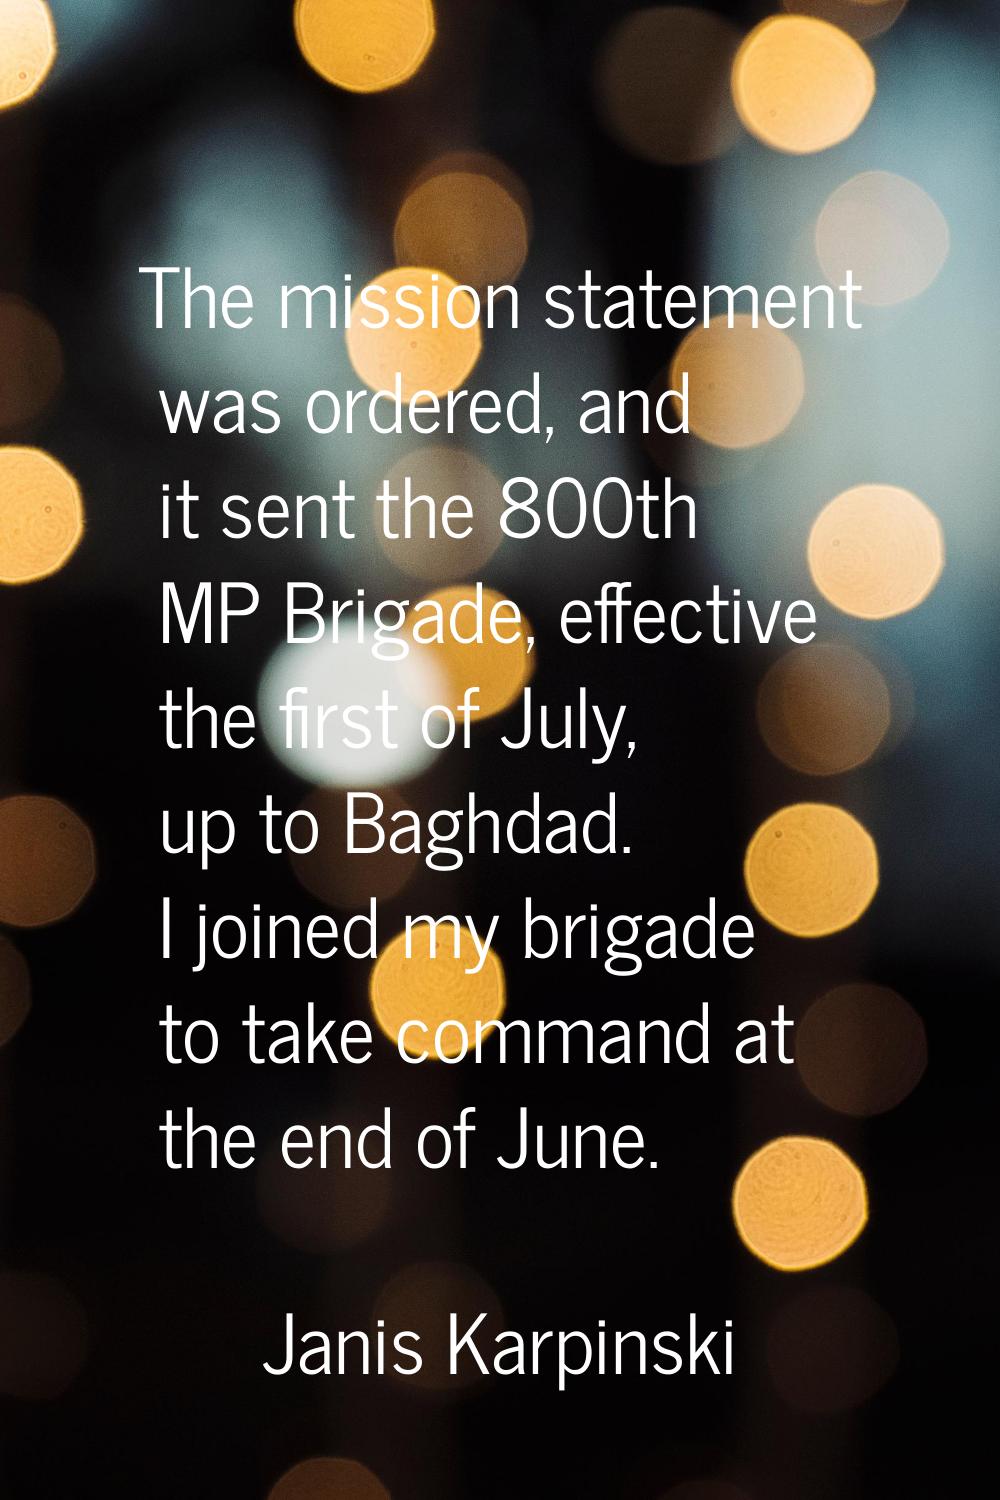 The mission statement was ordered, and it sent the 800th MP Brigade, effective the first of July, u